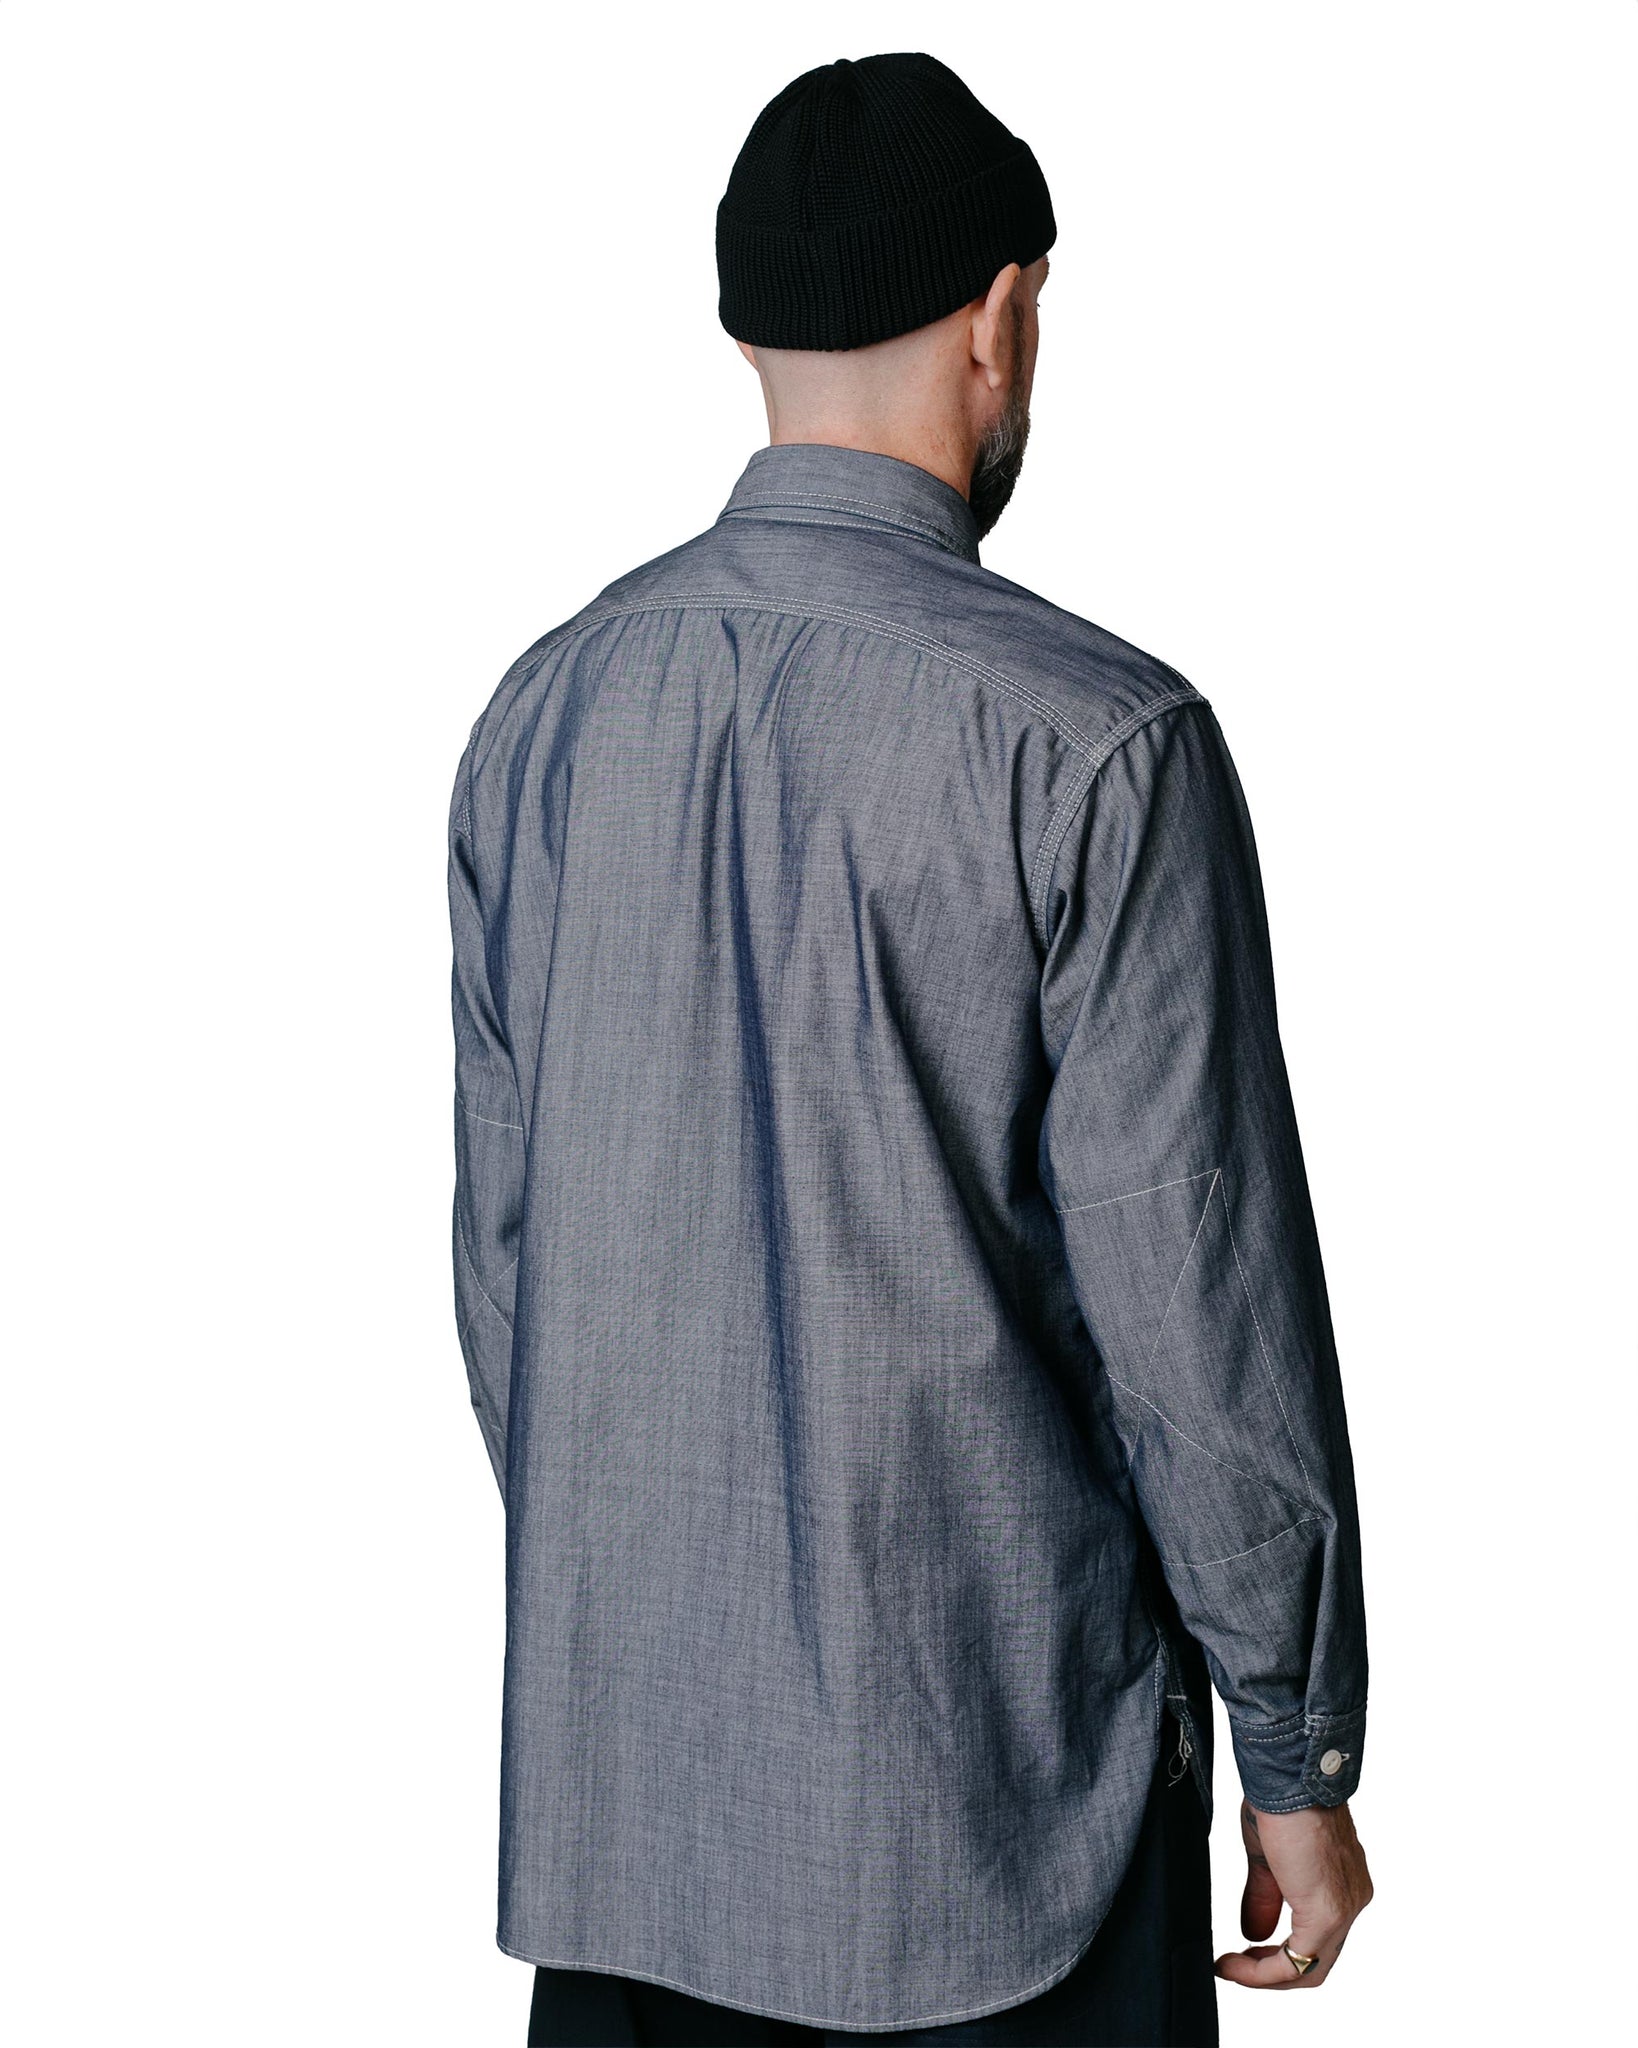 Chambray Shirting Medium Blue 58 Wide Woven Cotton Fabric by the Yard  (2929S-5F-blue)